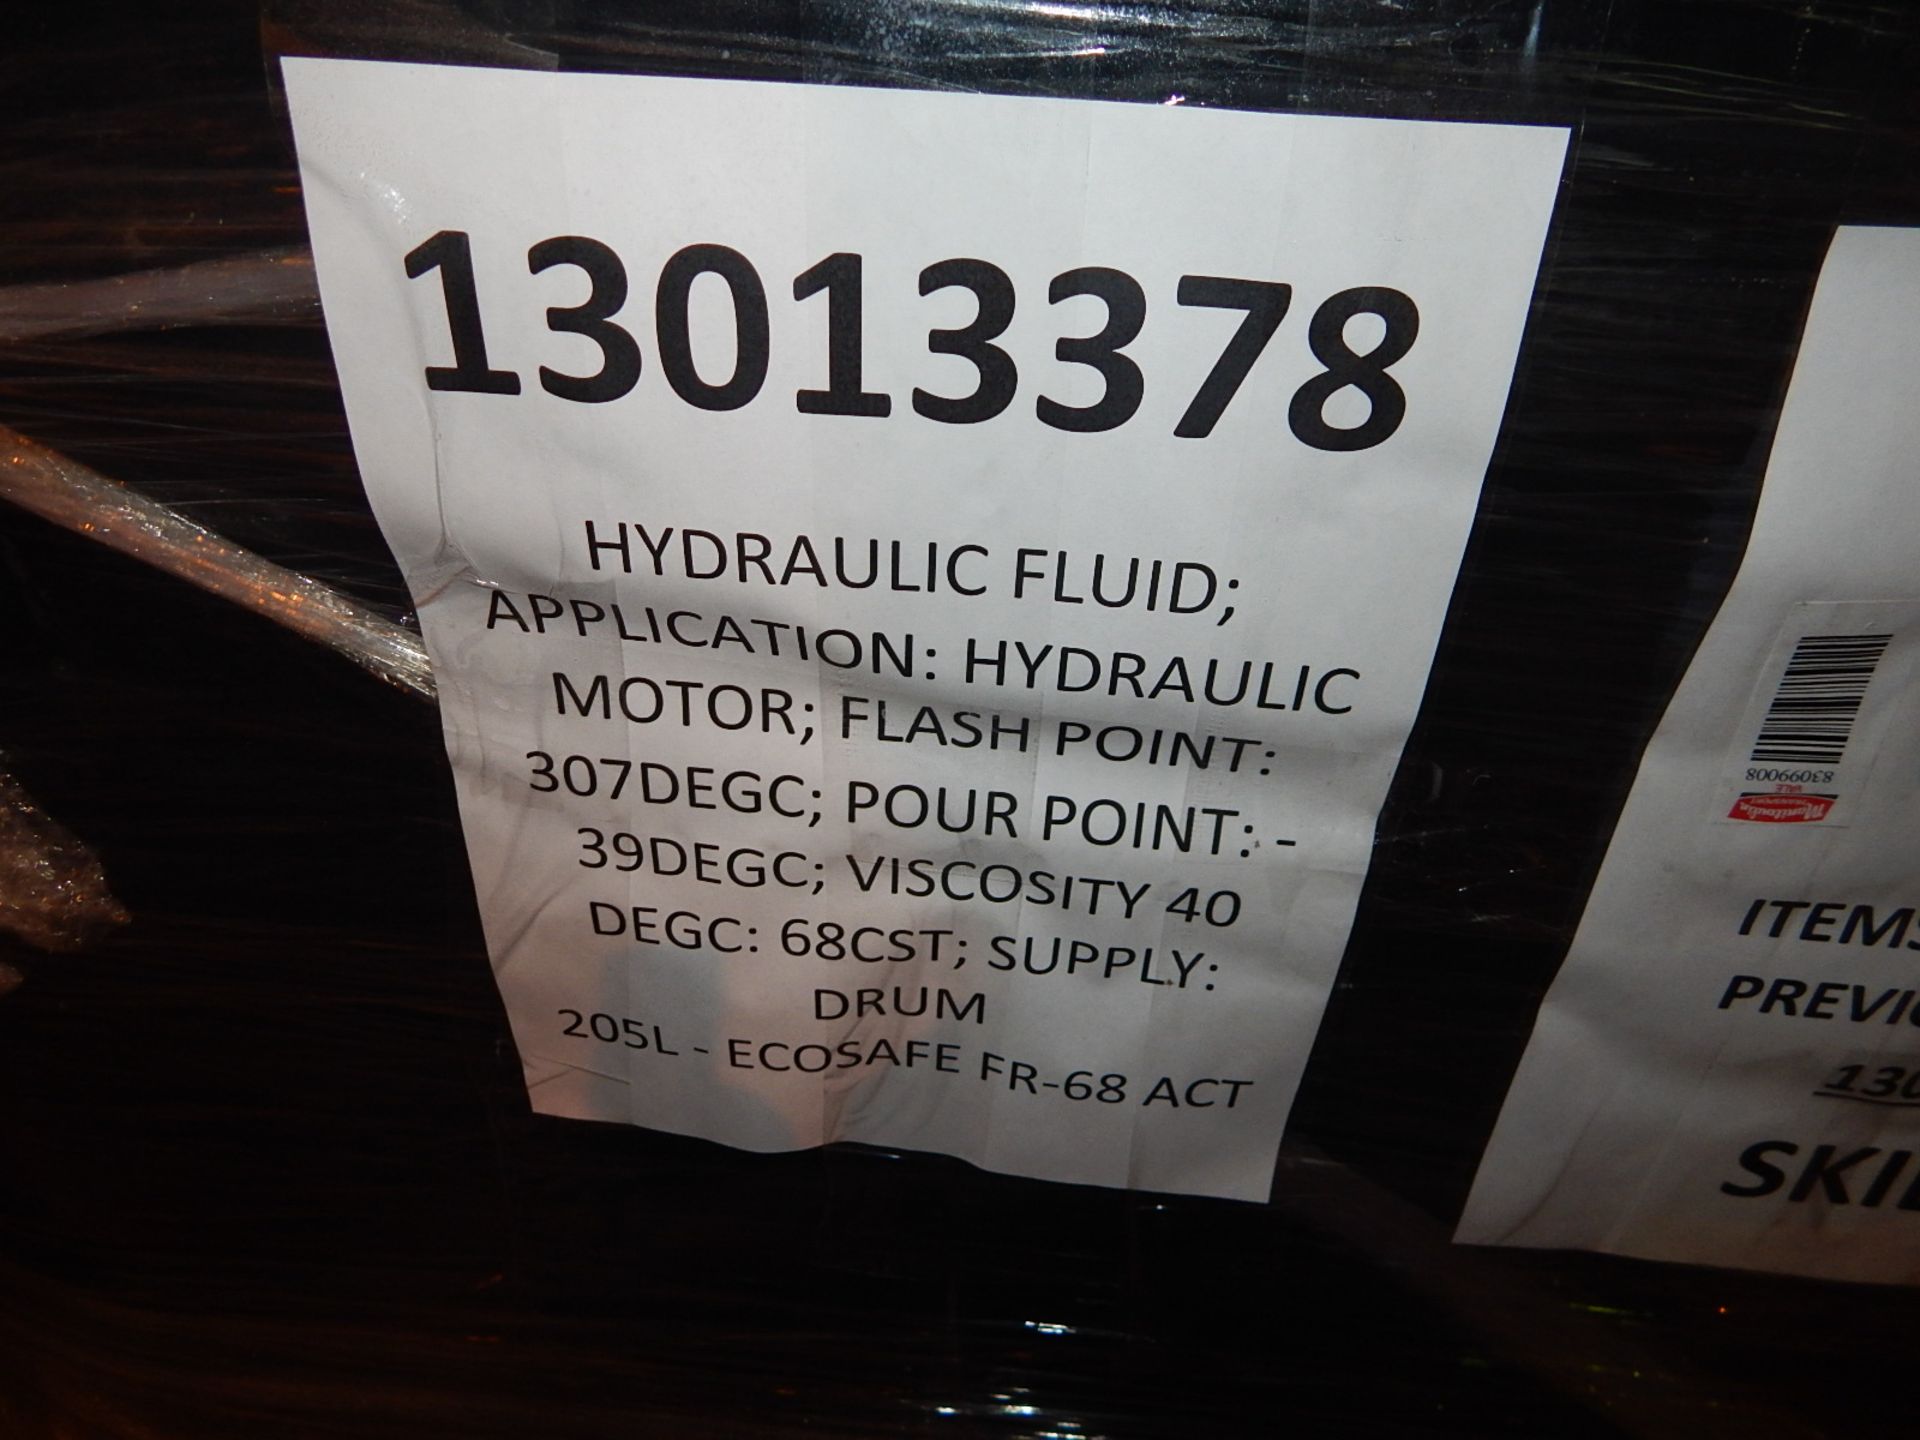 LOT/ (6) 45 GAL DRUMS ECOSAFE FR-68 HYDRAULIC OIL (WHSE 61 OIL ROOM) - Image 2 of 3